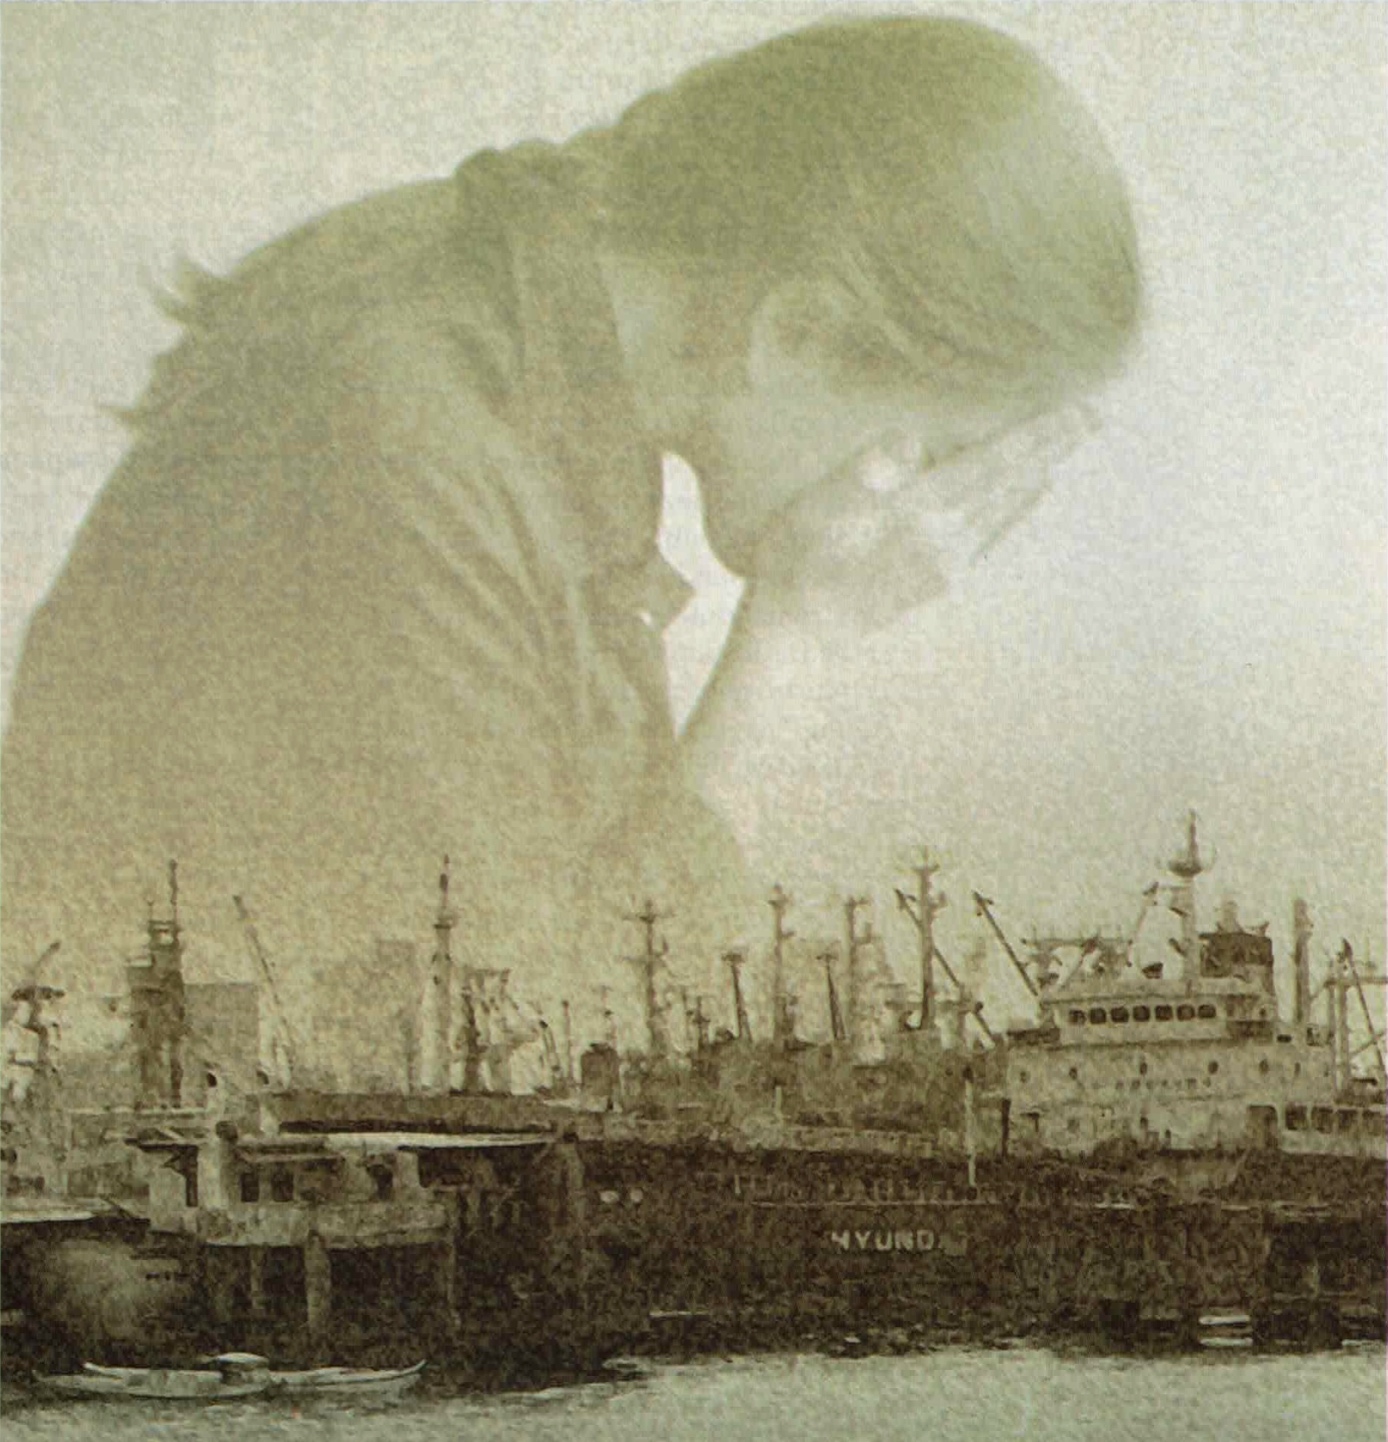 In foreground, ships docked at an old pier; in background, a woman with her face in her hands